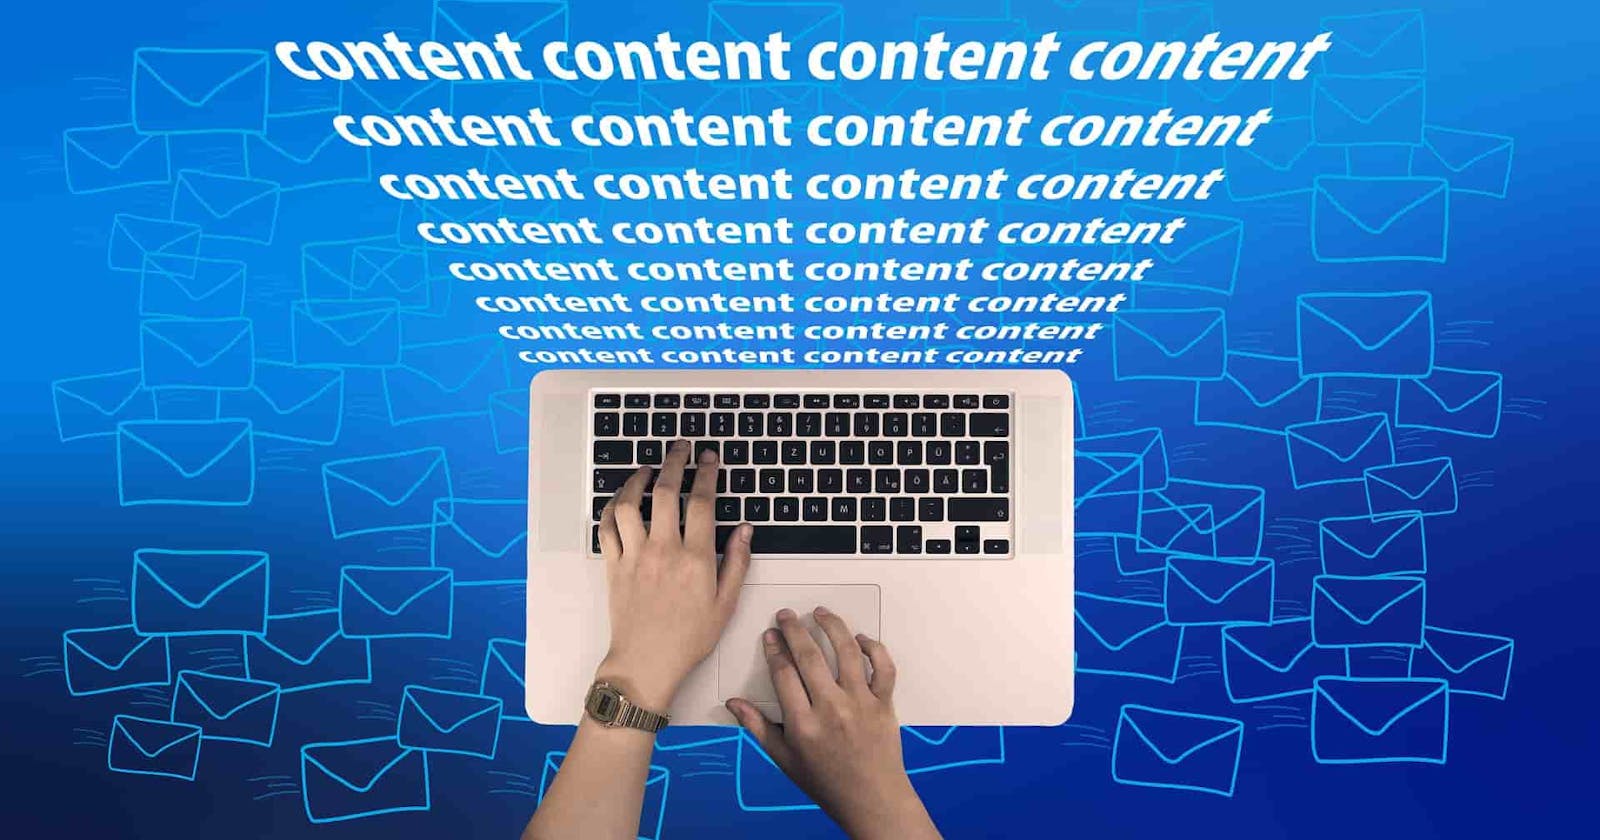 What Makes Good Content Great?